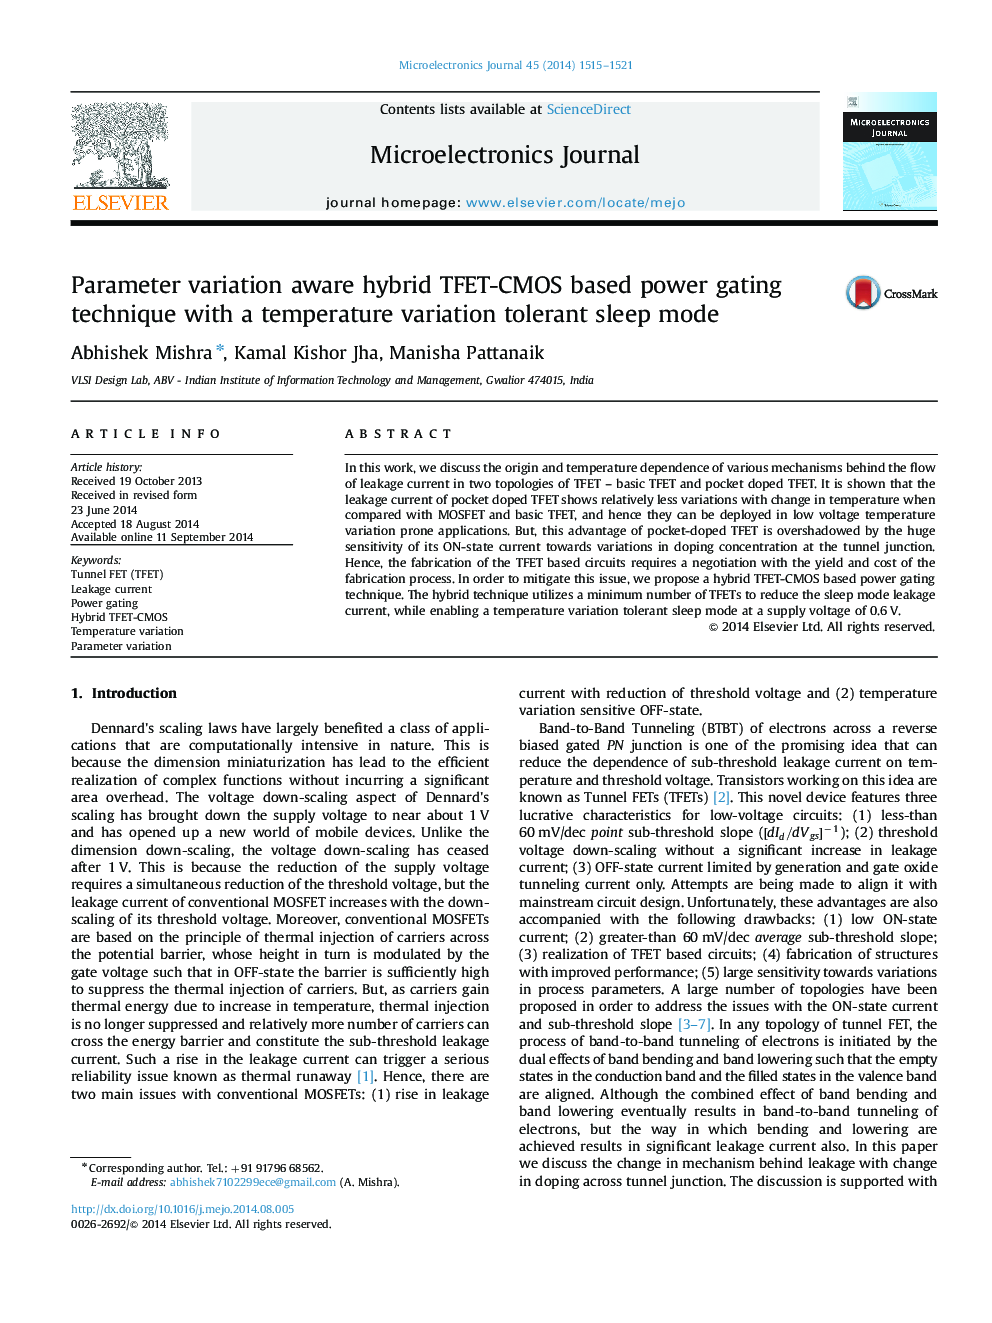 Parameter variation aware hybrid TFET-CMOS based power gating technique with a temperature variation tolerant sleep mode